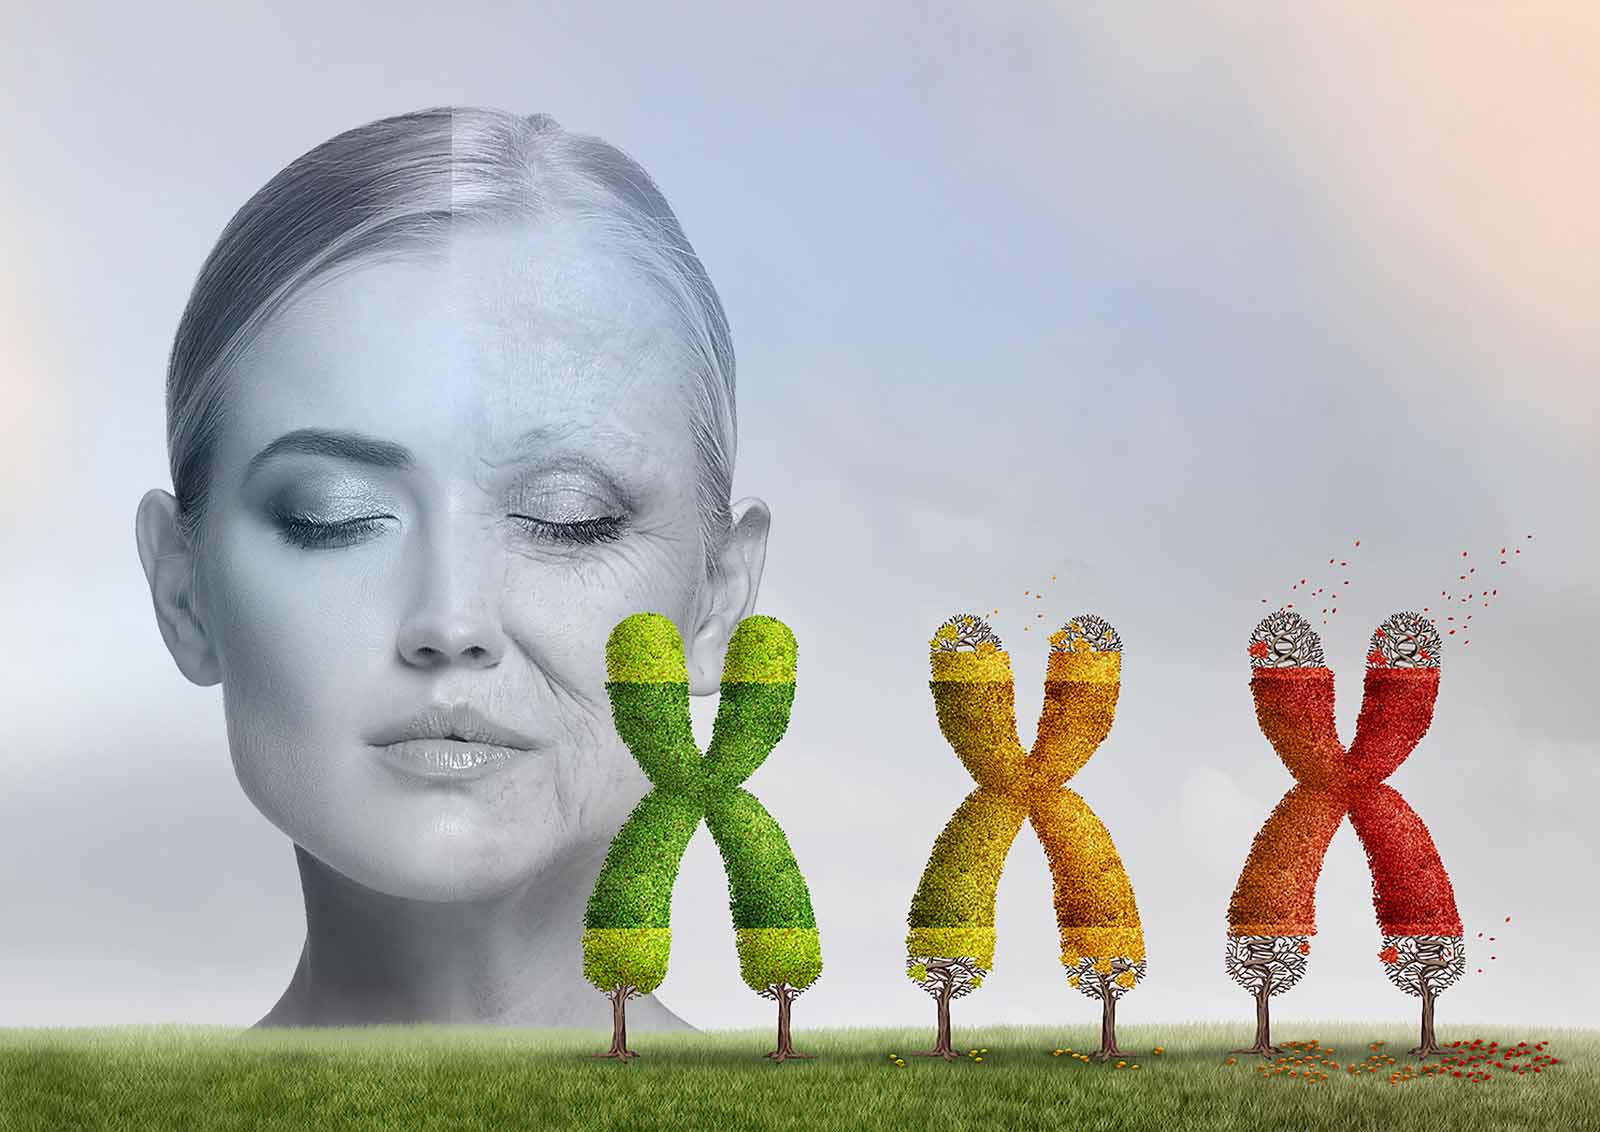 Photo illustration of chromosomes and the effects of aging on humans.